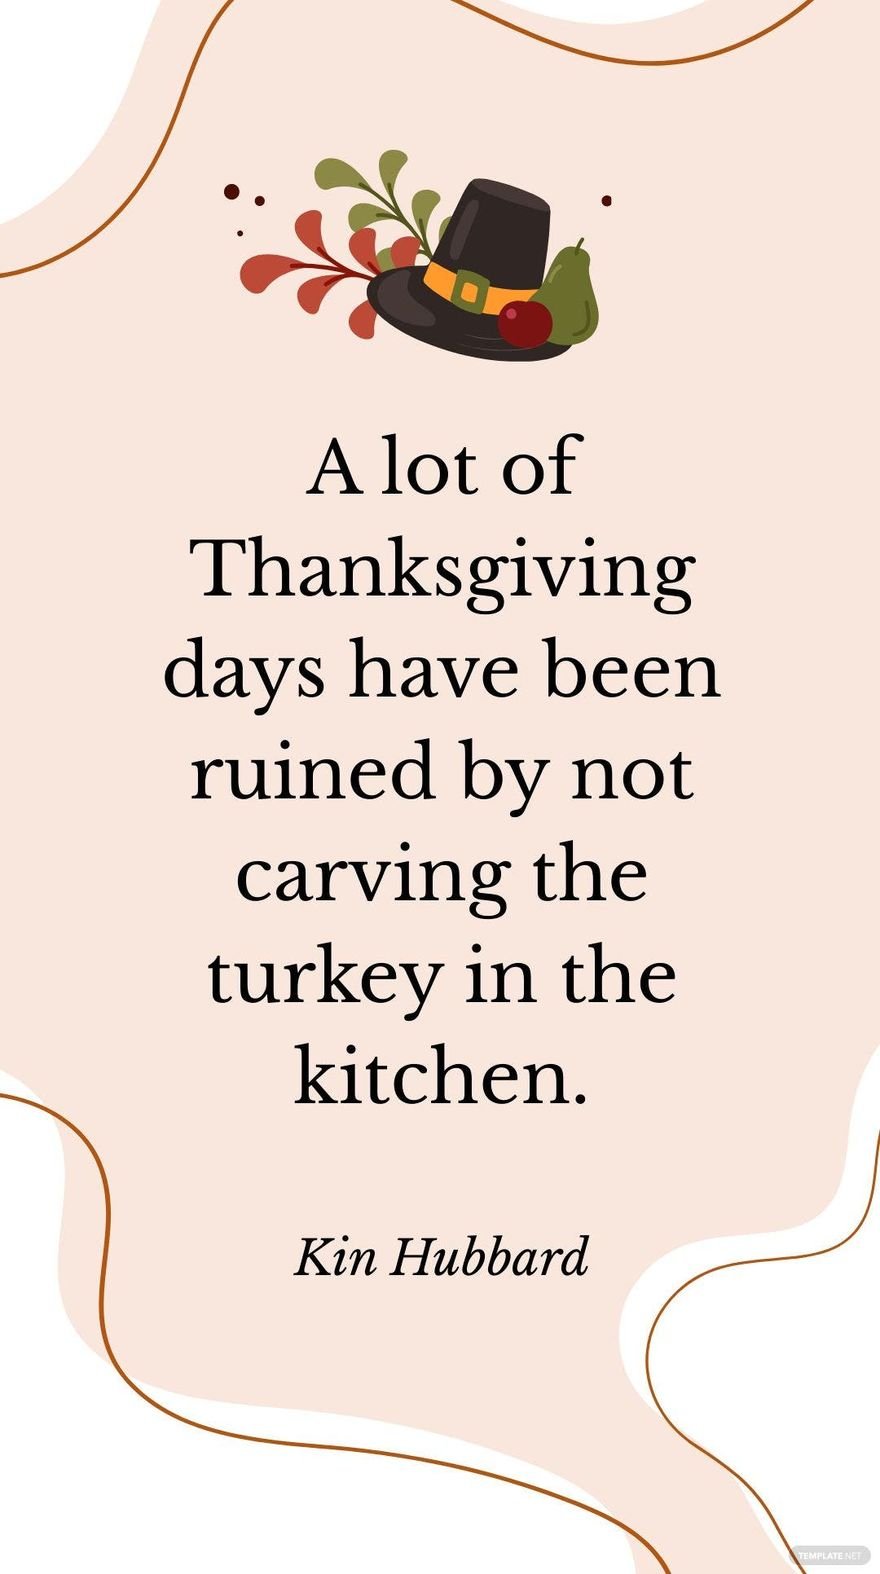 Free Kin Hubbard - A lot of Thanksgiving days have been ruined by not carving the turkey in the kitchen.